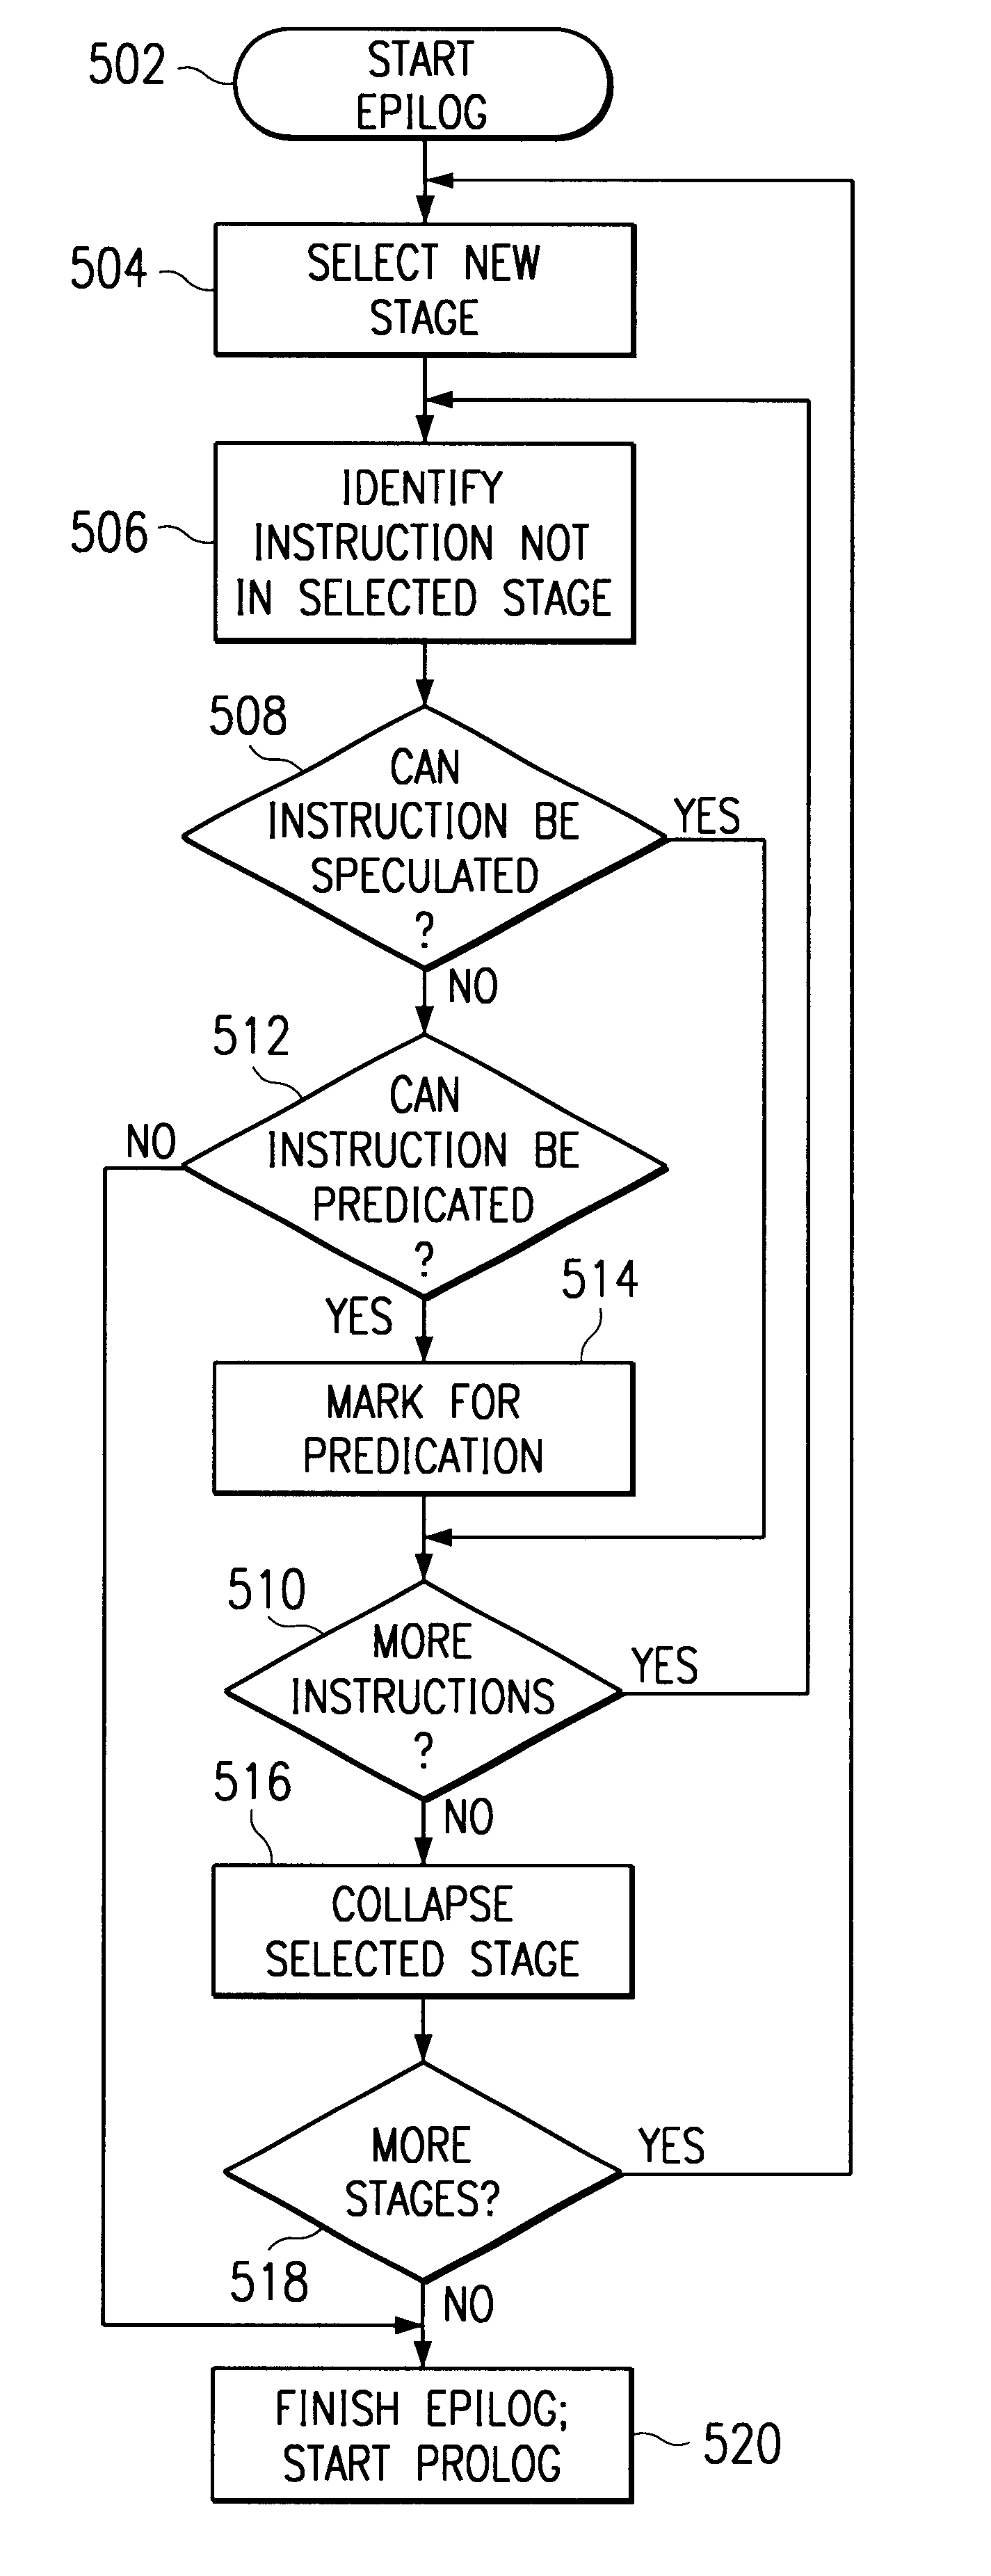 Method for collapsing the prolog and epilog of software pipelined loops